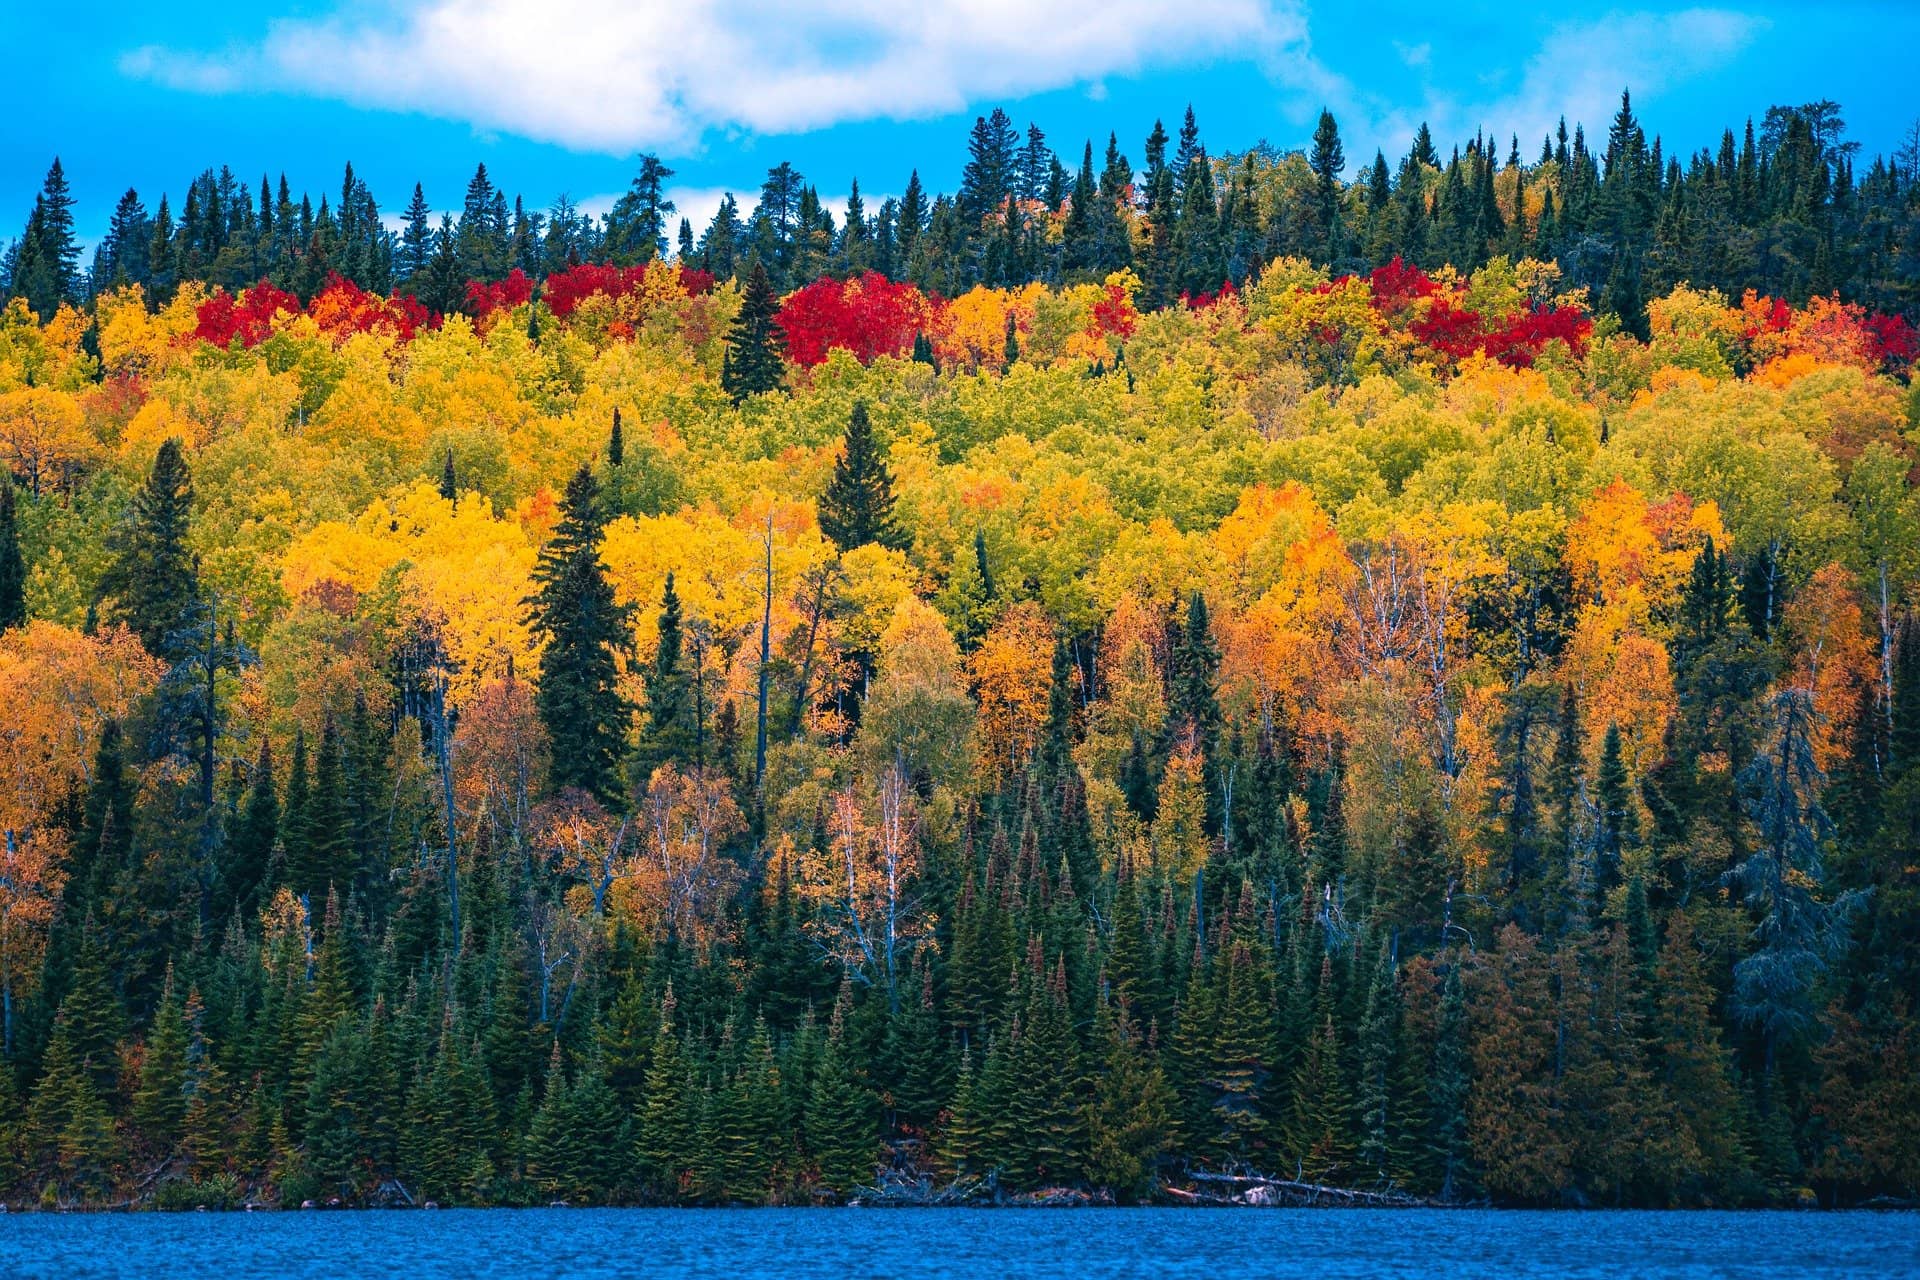 How Autumn is captured through time-lapse